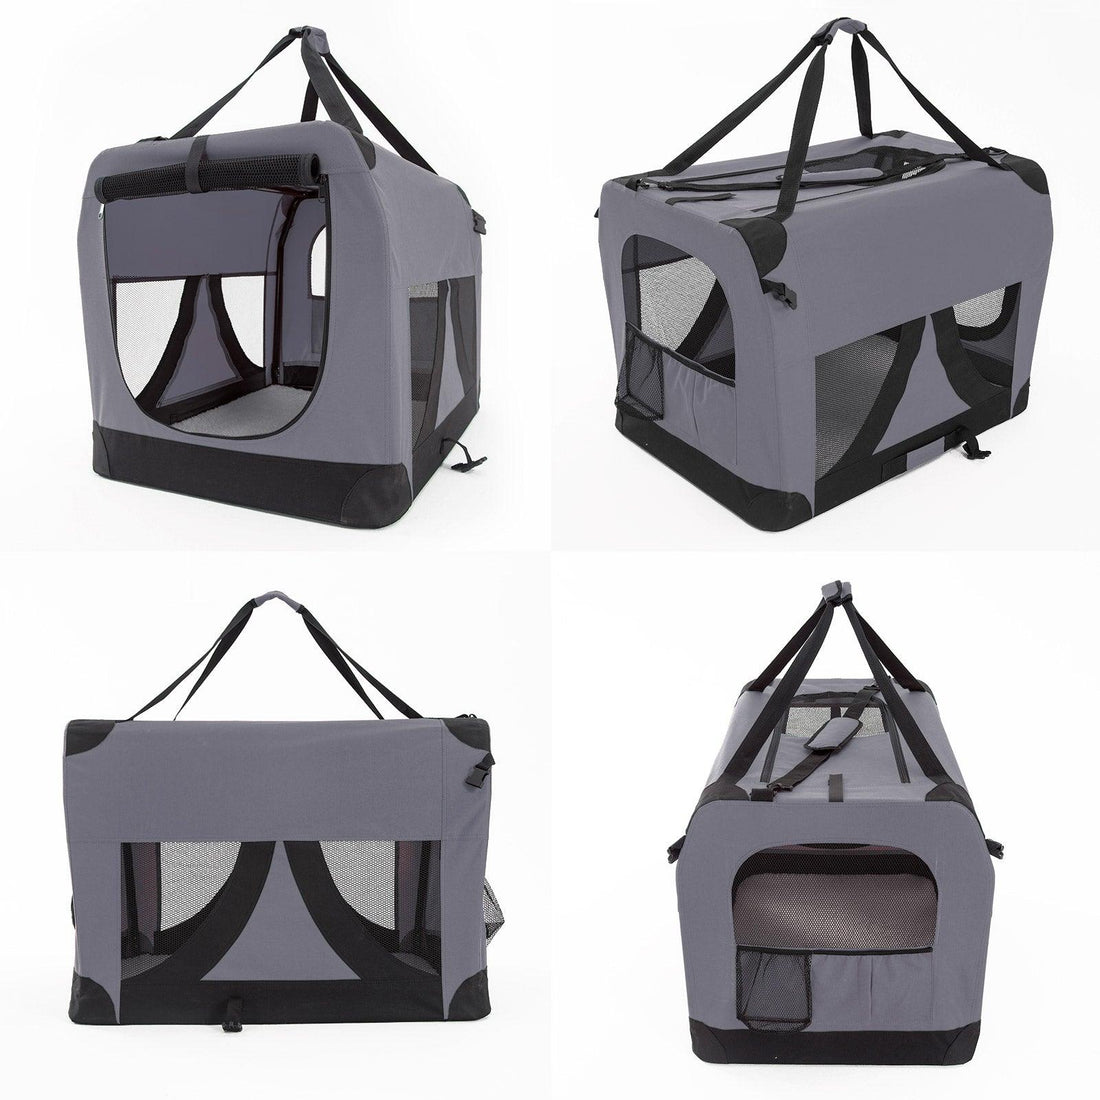 Portable Soft Dog Cage Crate Carrier - GREY - Pets Gear